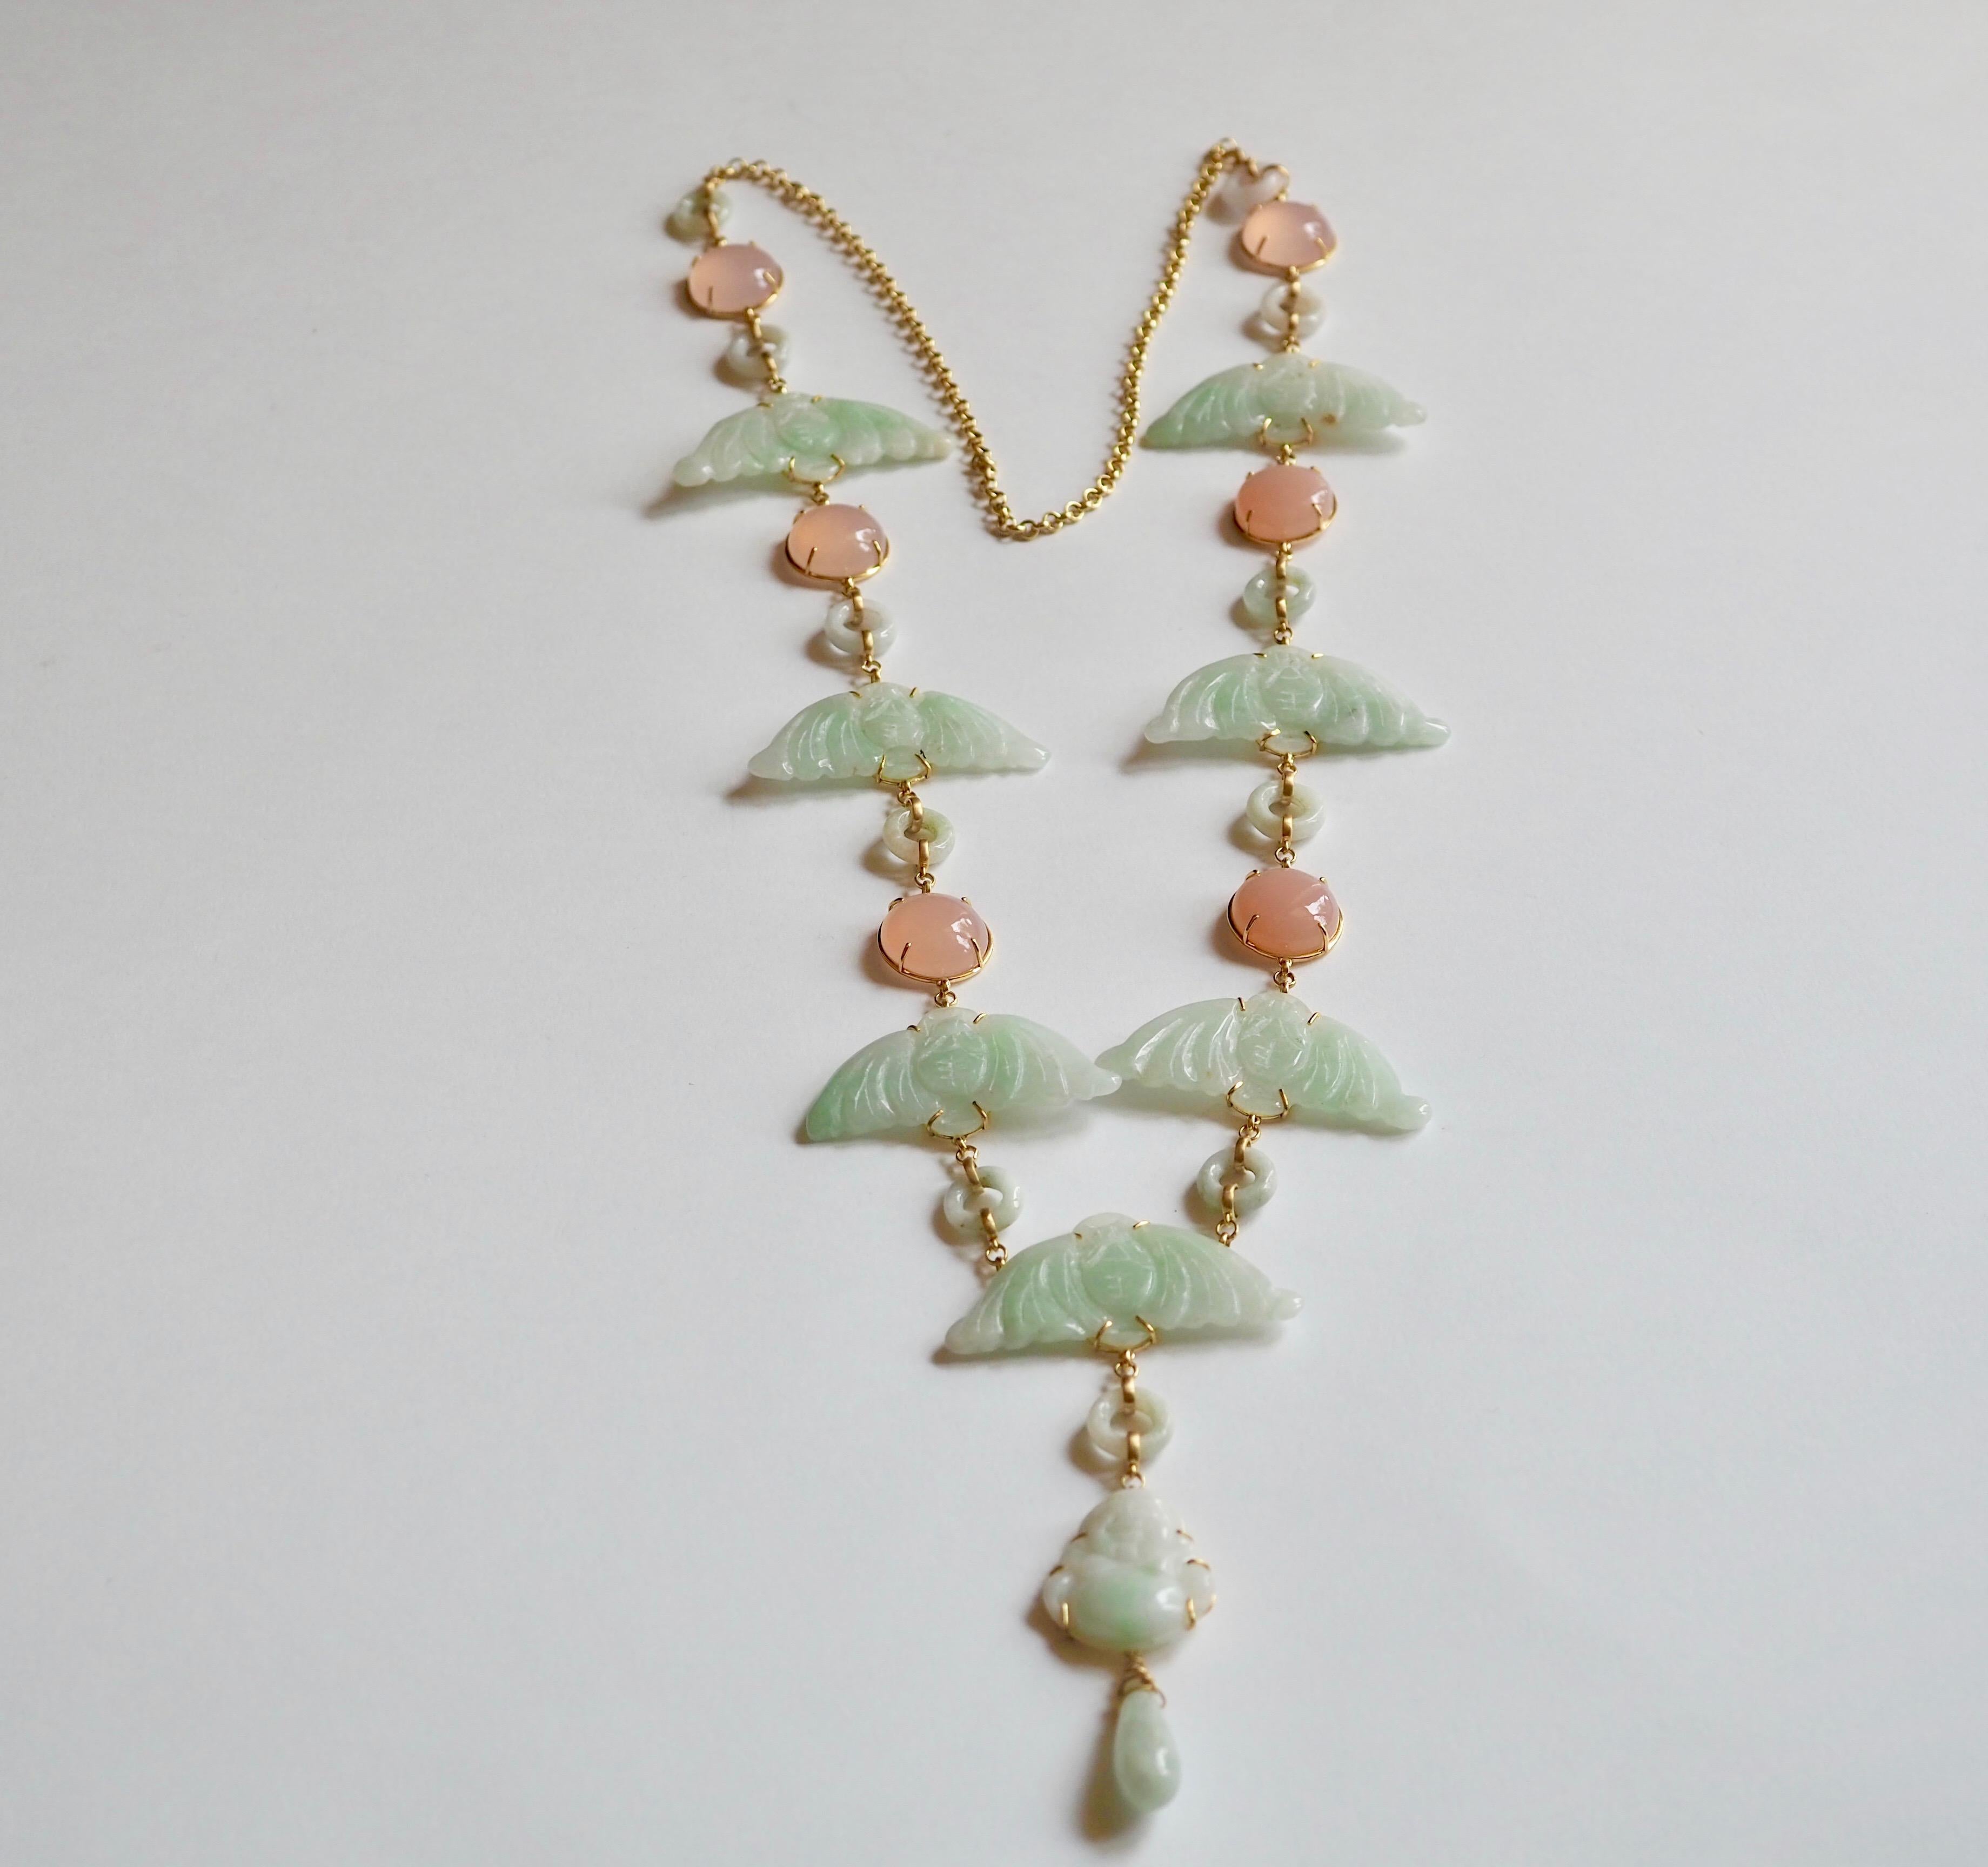 Long necklace total length 47cm cabochon rose quartz antiques carved jade with bat shape, little carved  buddha,  jade  drop. Gold.
All Giulia Colussi jewelry is new and has never been previously owned or worn. Each item will arrive at your door